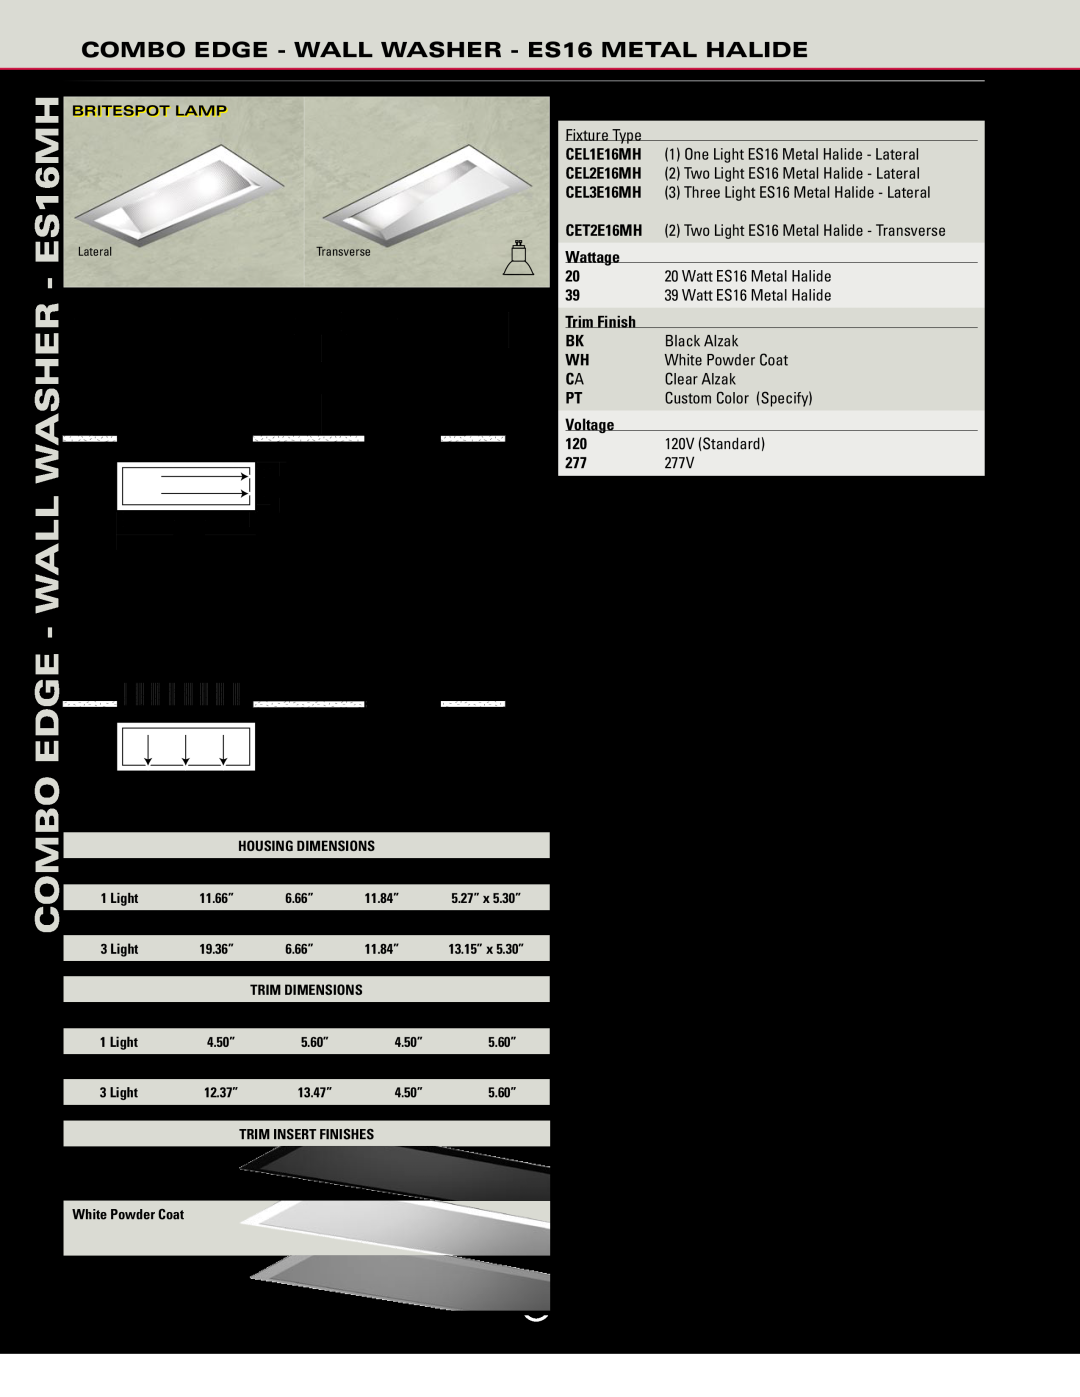 Cooper Lighting Combo Edge manual ES16MH, Washer, Wall, CEL2E16MH-39-CA-120, SEE PAGE 13 FOR IMPORTANT LAMP INFORMATION 